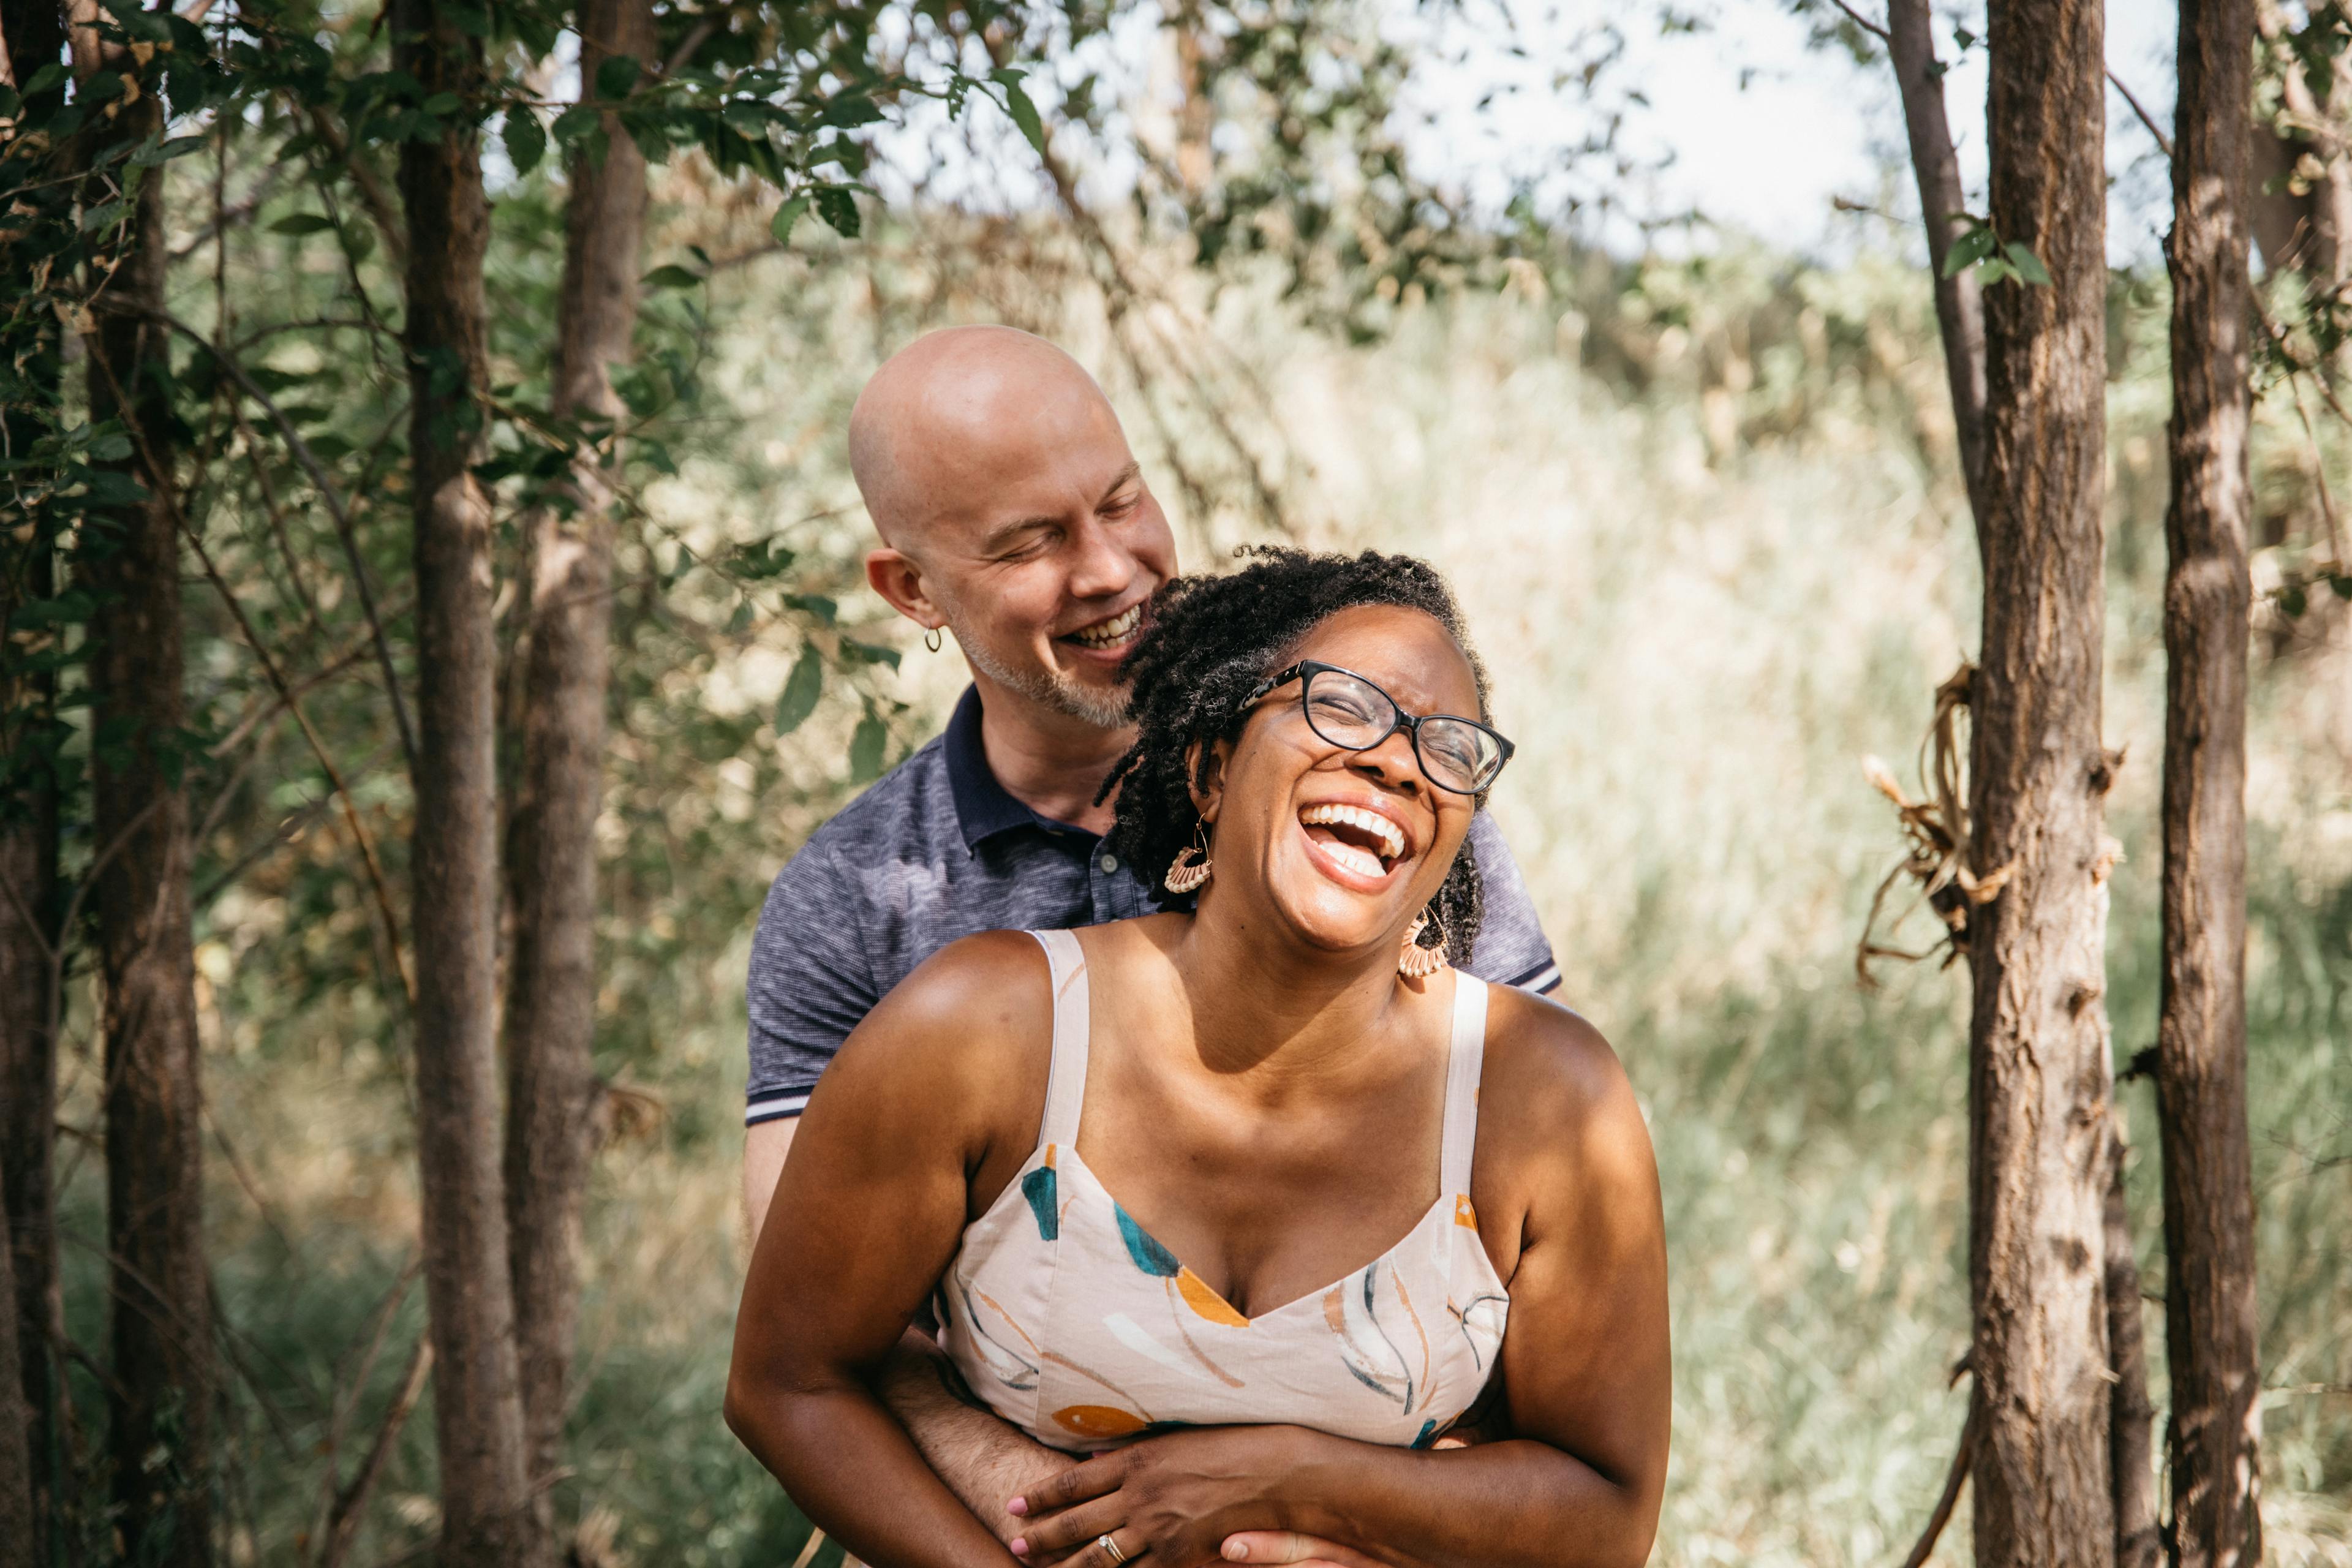 Couple laughing together in a forested area